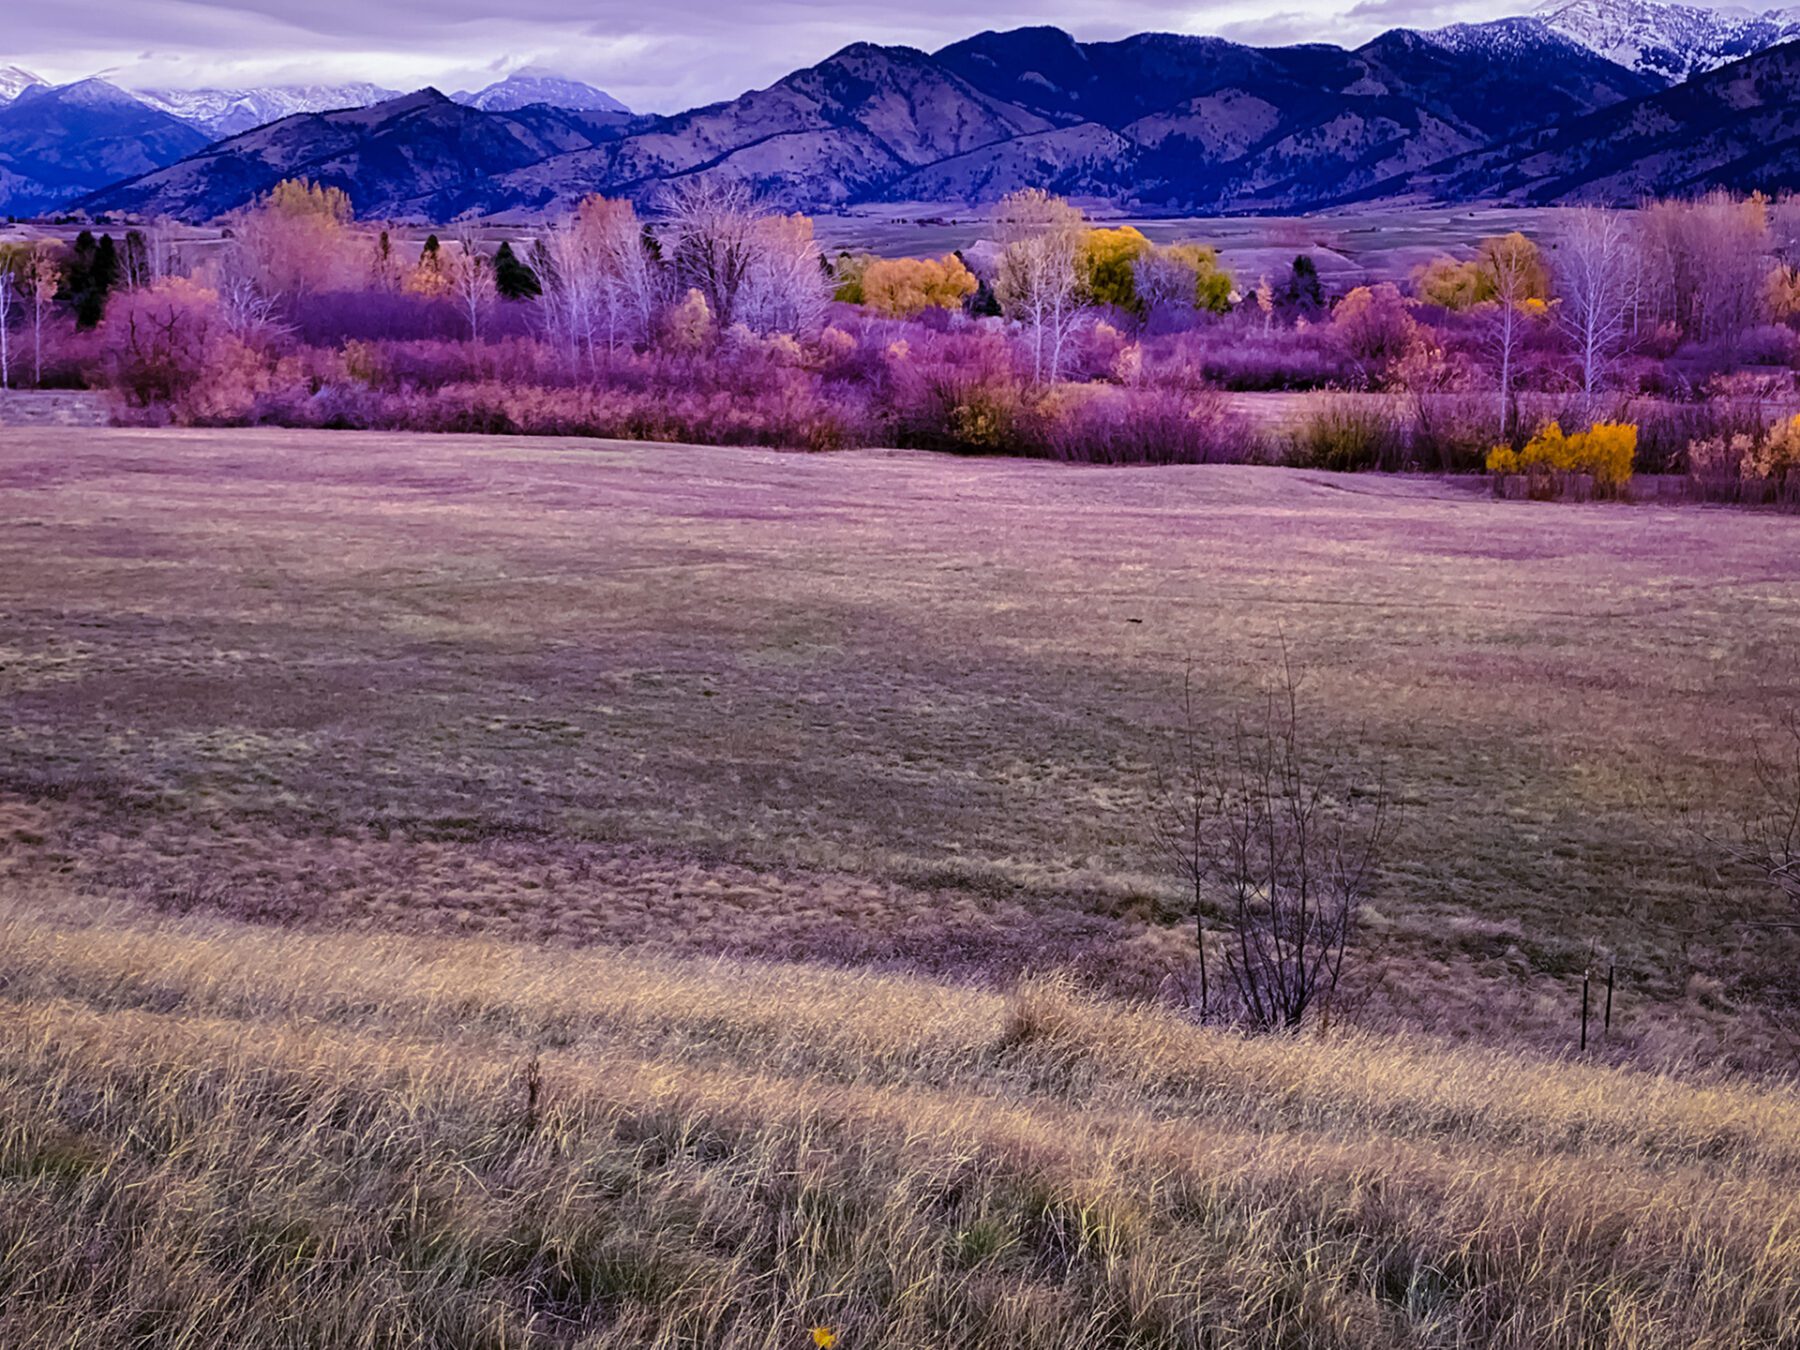 A Montana with purple trees and mountains in the background.